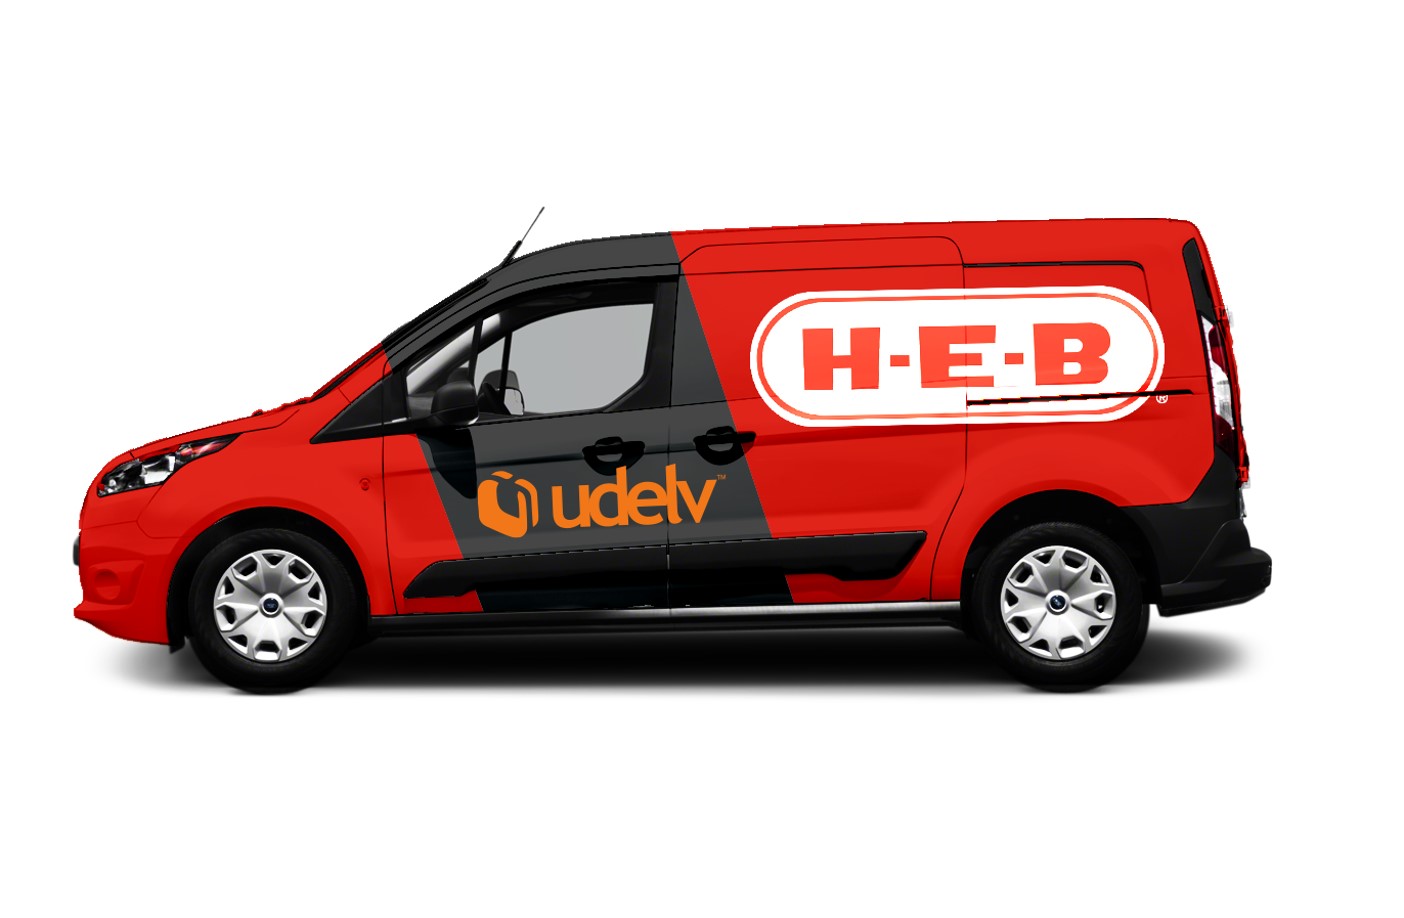 Udelv partners with HEB on Texas autonomous grocery delivery pilot